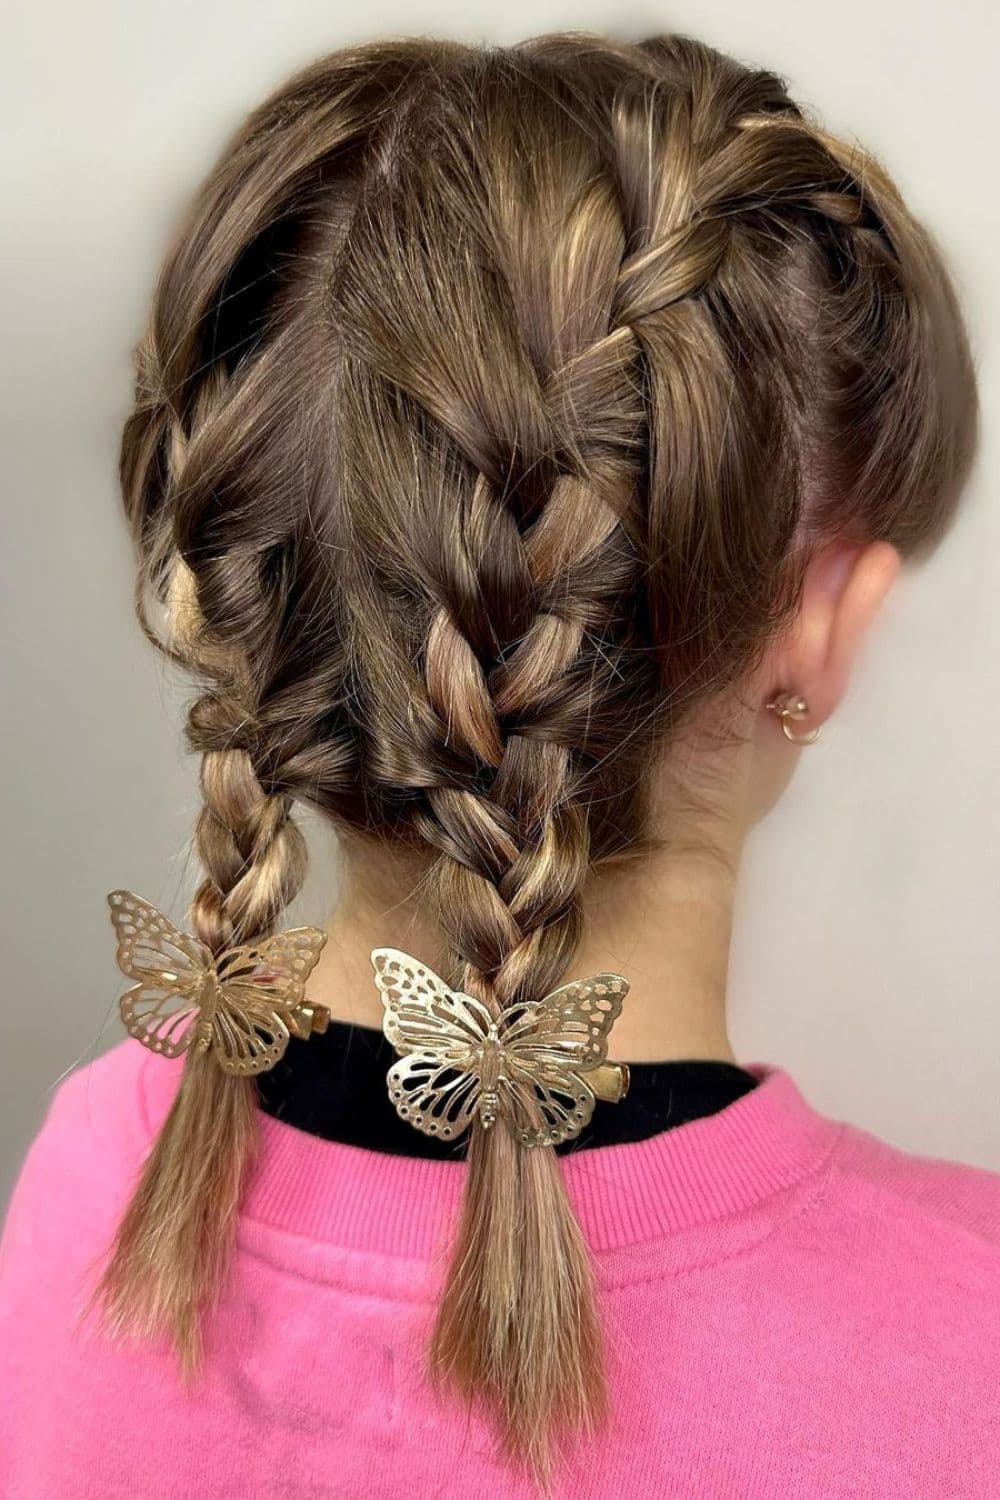 A girl with double French braids with two butterflies accessories.